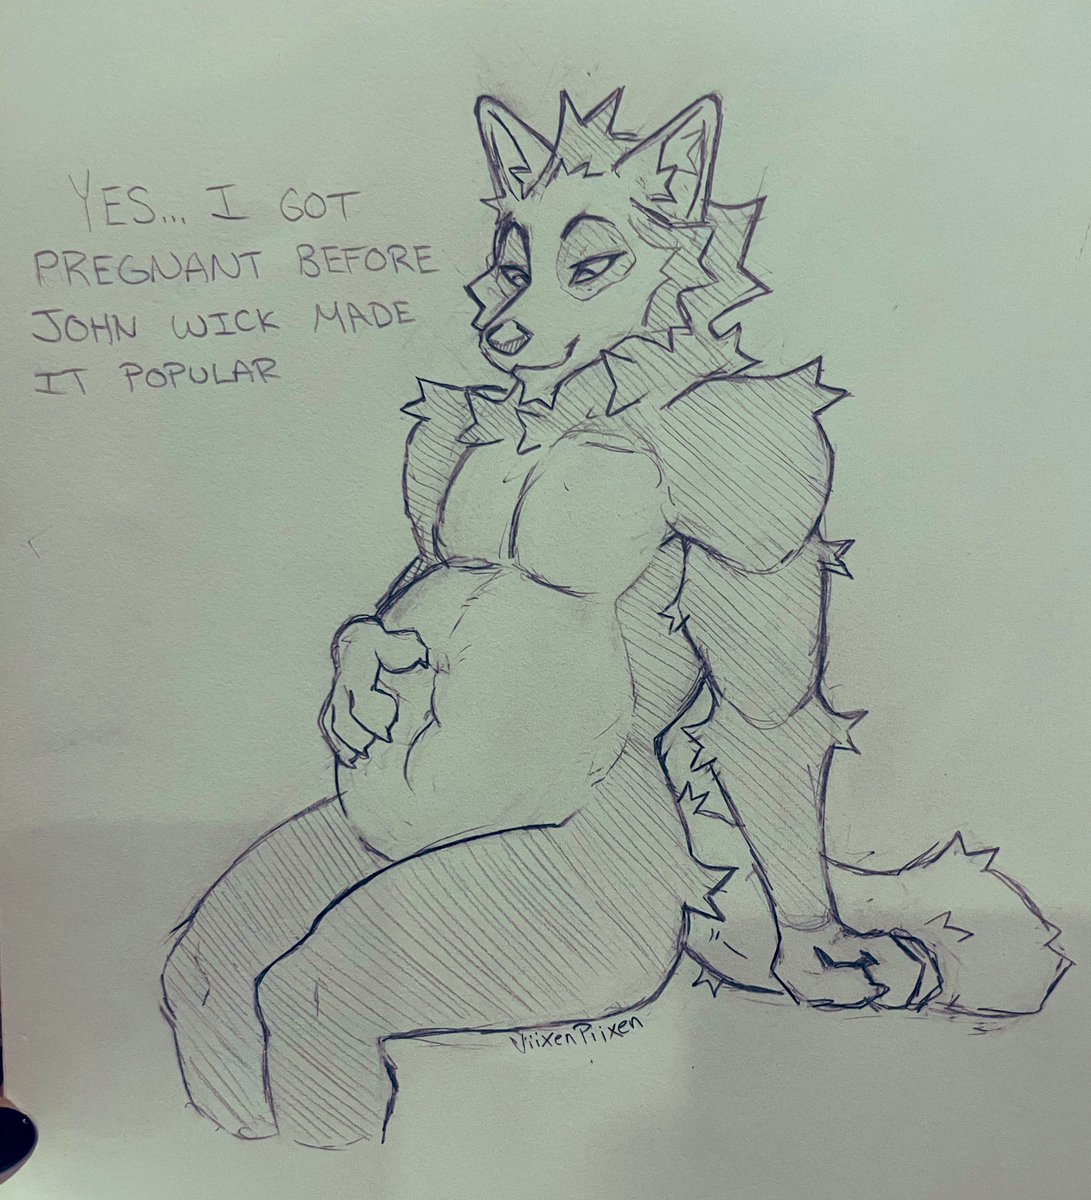 “The pen is mightier than the sword”
So I drew your fursona pregnant